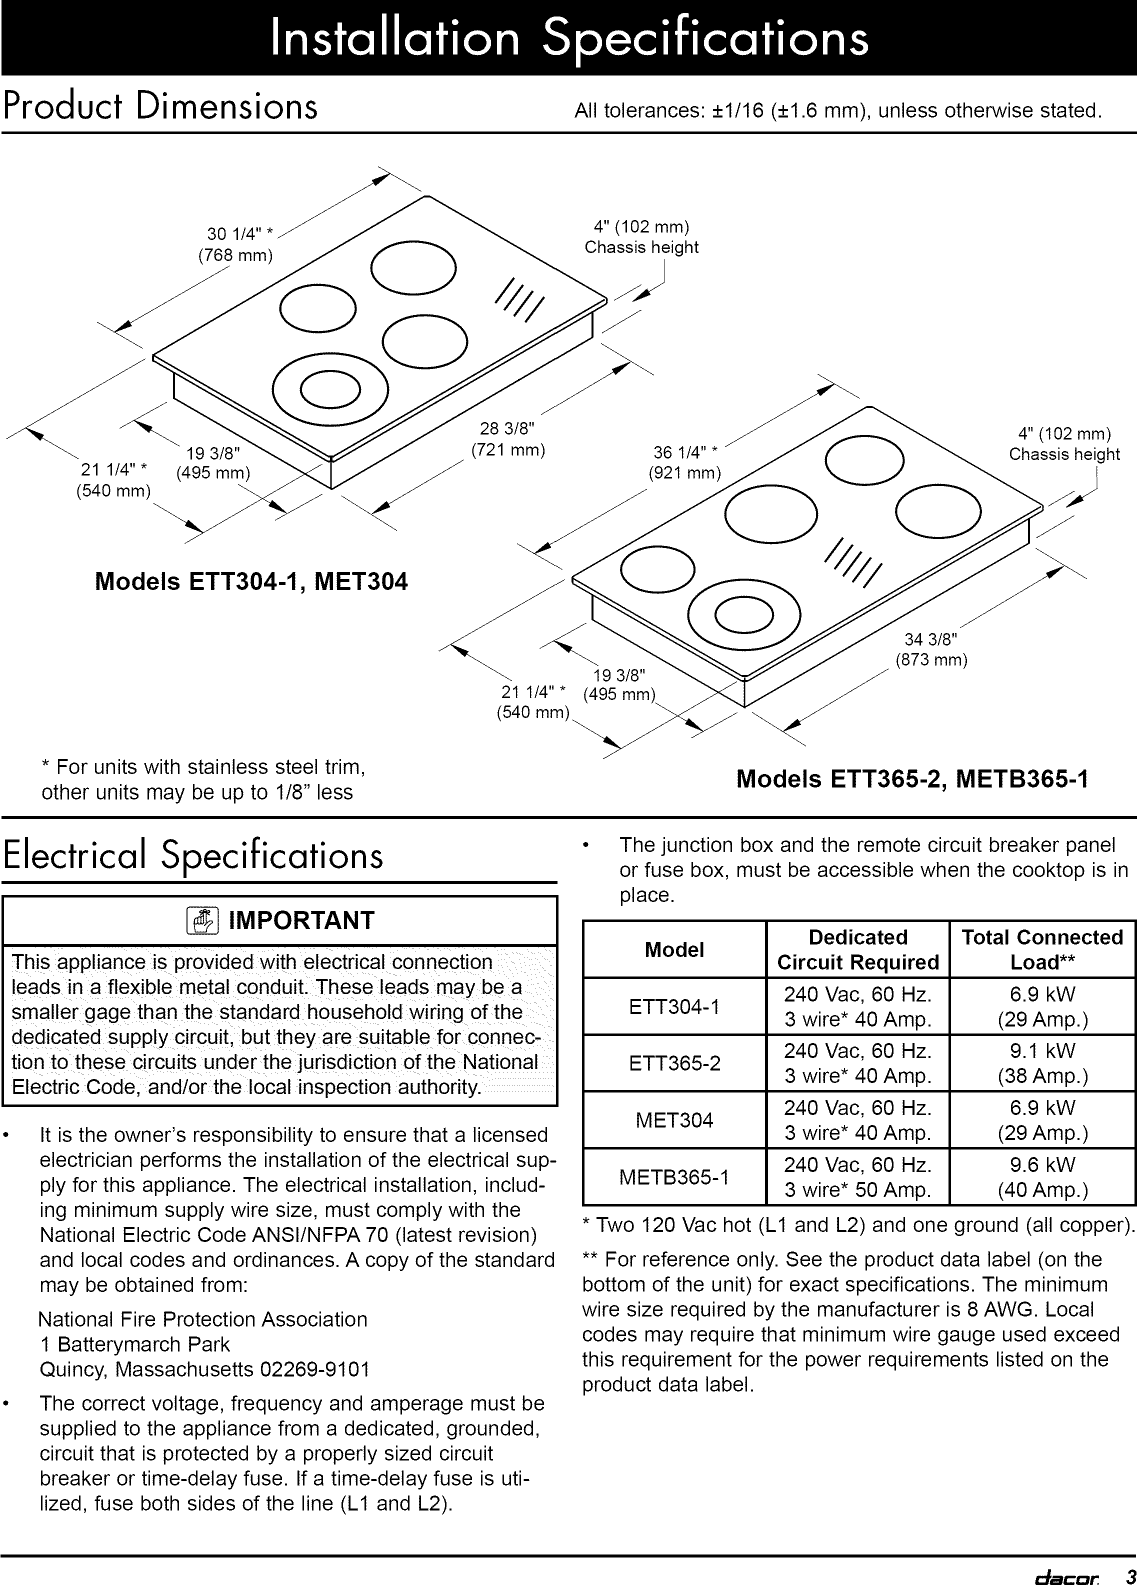 Page 5 of 12 - Dacor ETT3041B User Manual  COOKTOP - Manuals And Guides 1102291L